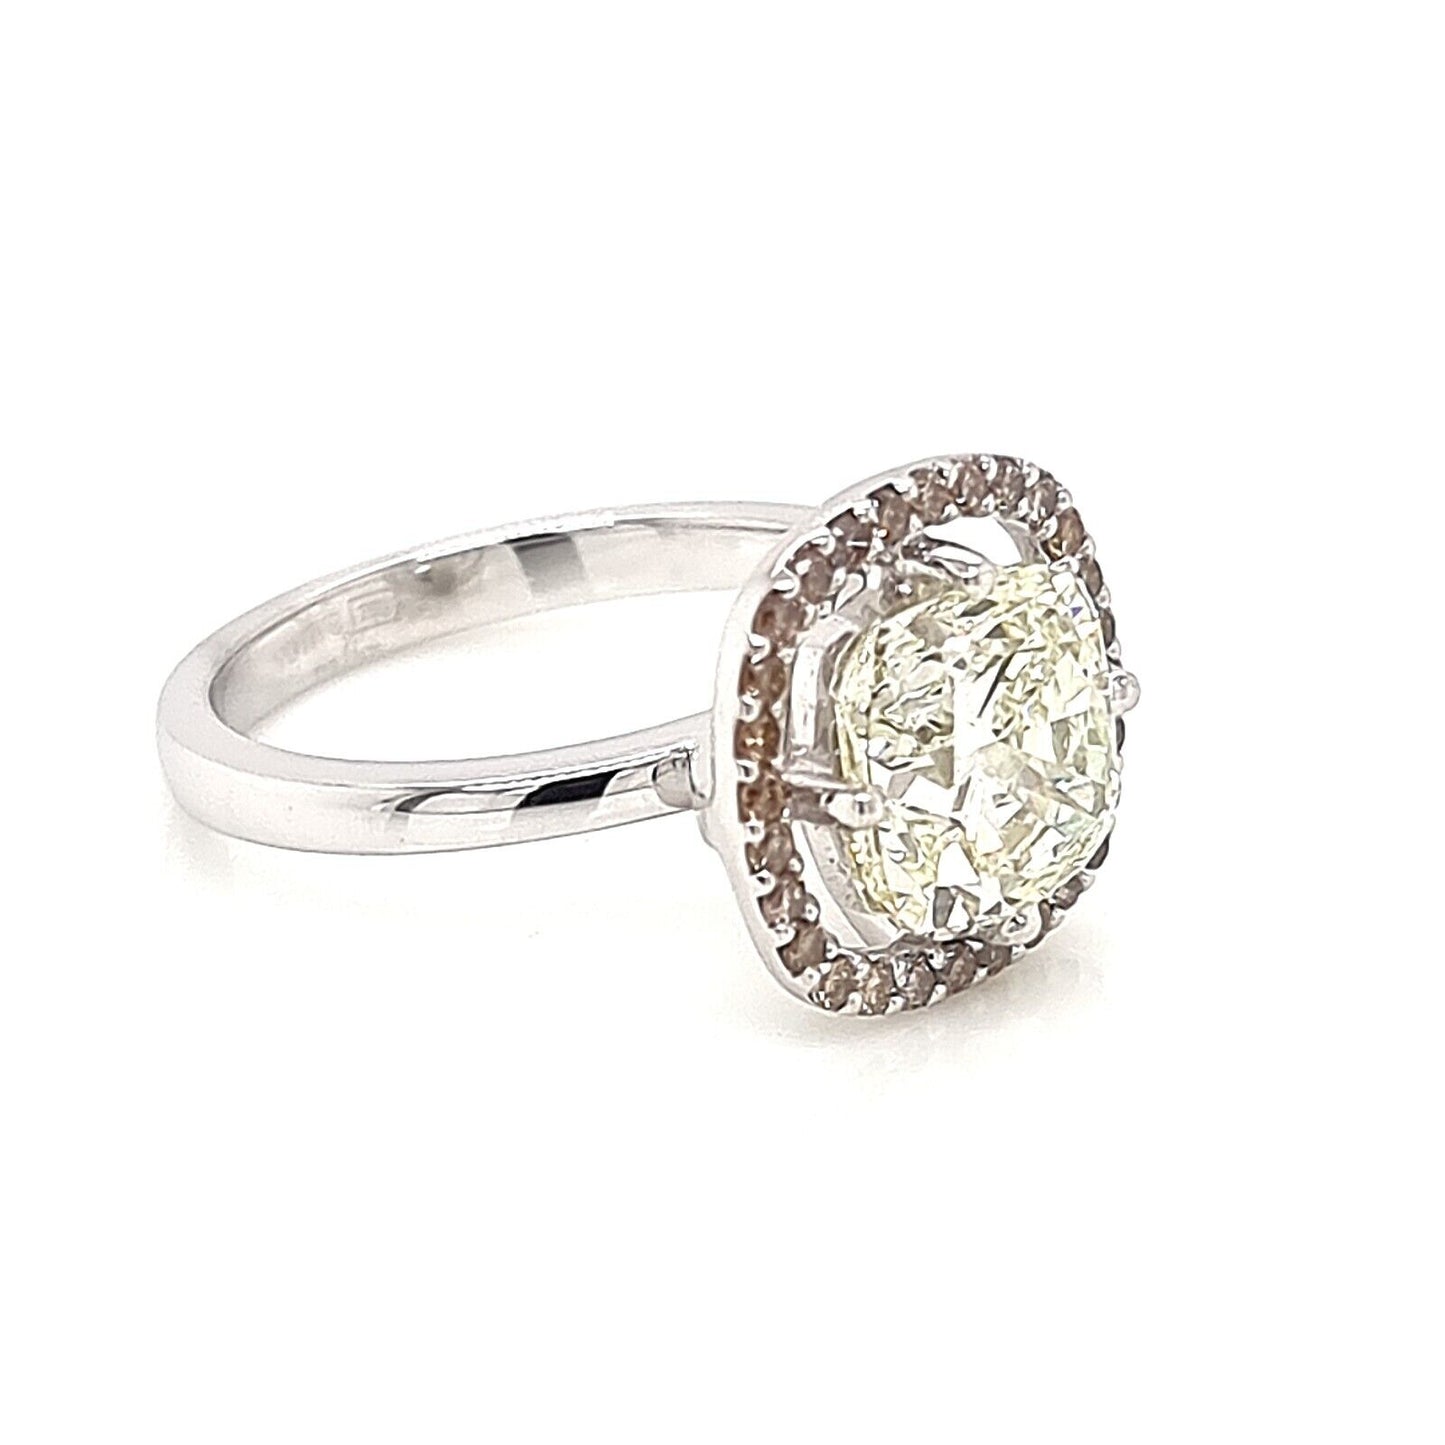 18K Gold Ring with Light Yellow Cushion Centre Diamond and Accent Brown Diamonds